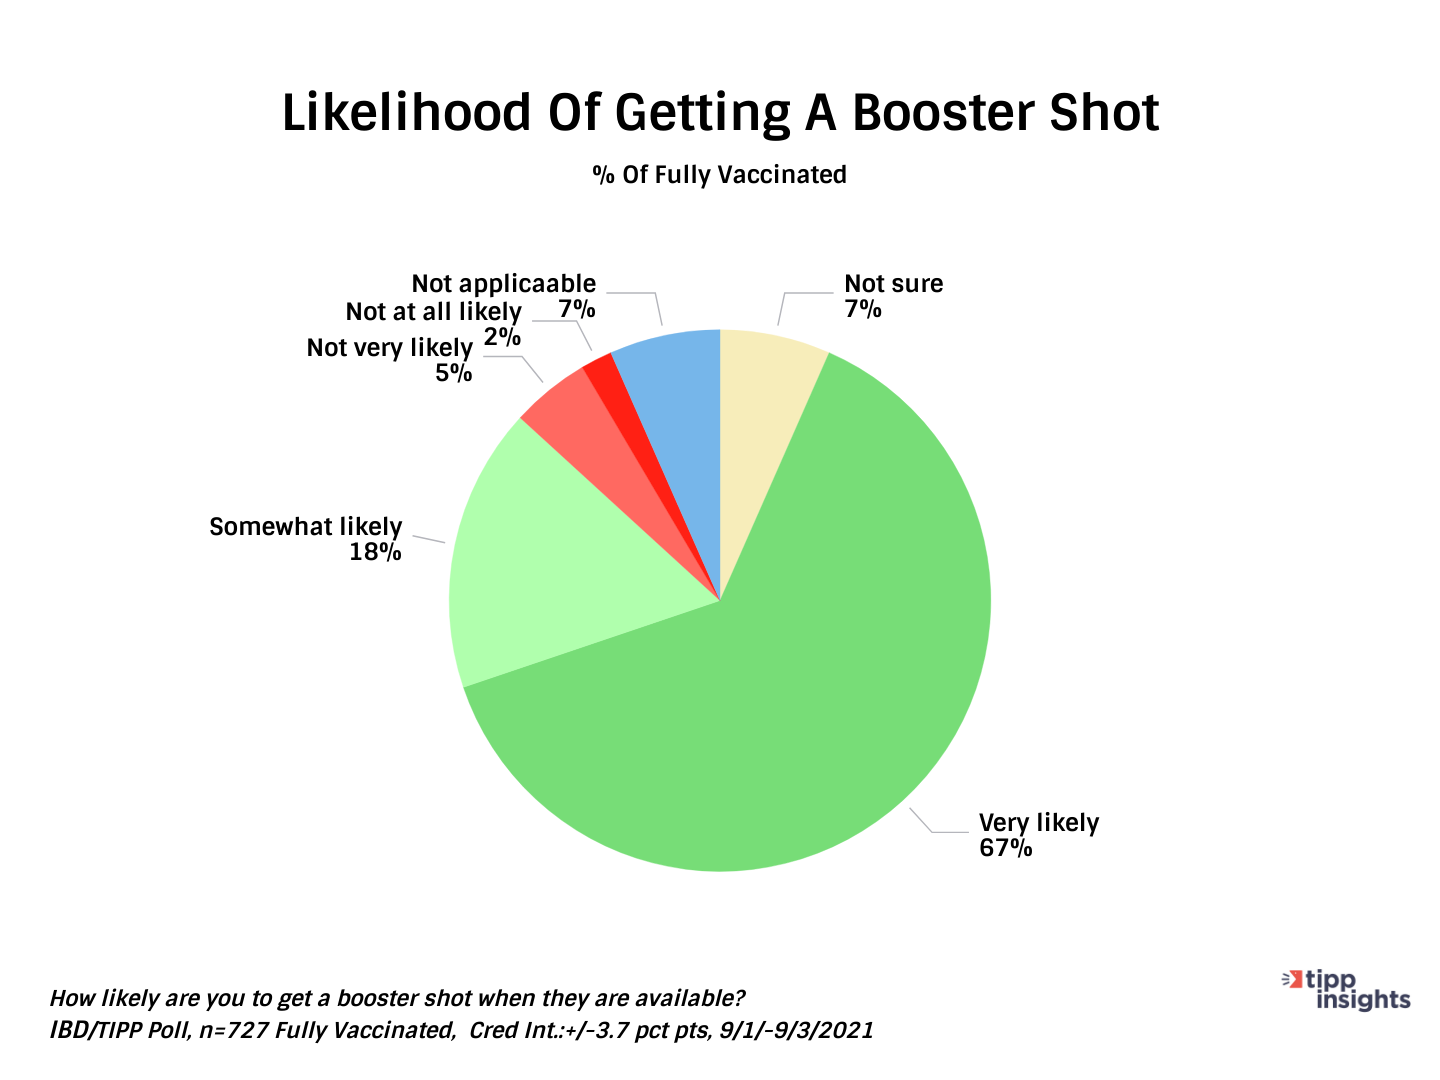 IBD/TIPP Poll Results Americans and the Likelihood of getting a COVID19 vaccine booster shot 